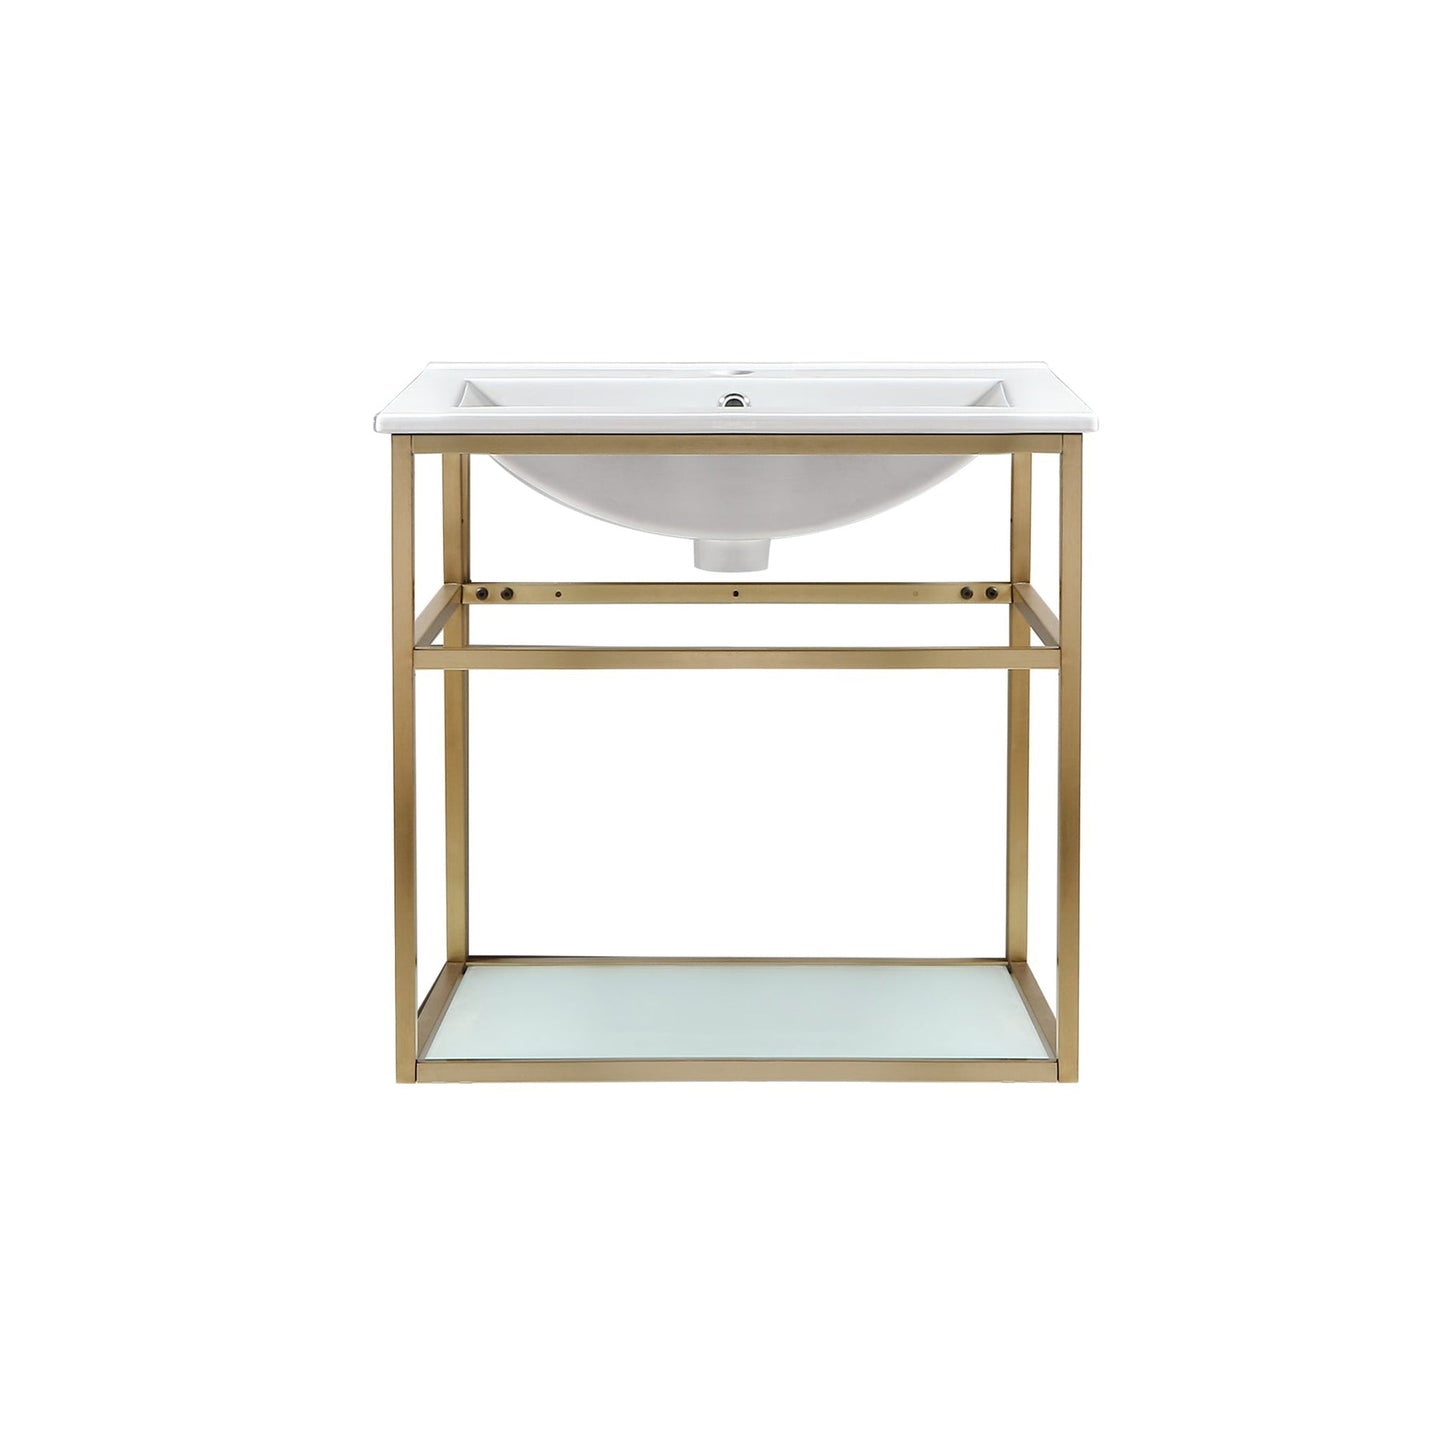 Swiss Madison Pierre 24" x 24" Wall-Mounted White Bathroom Vanity With Ceramic Single Sink and Gold Metal Frame